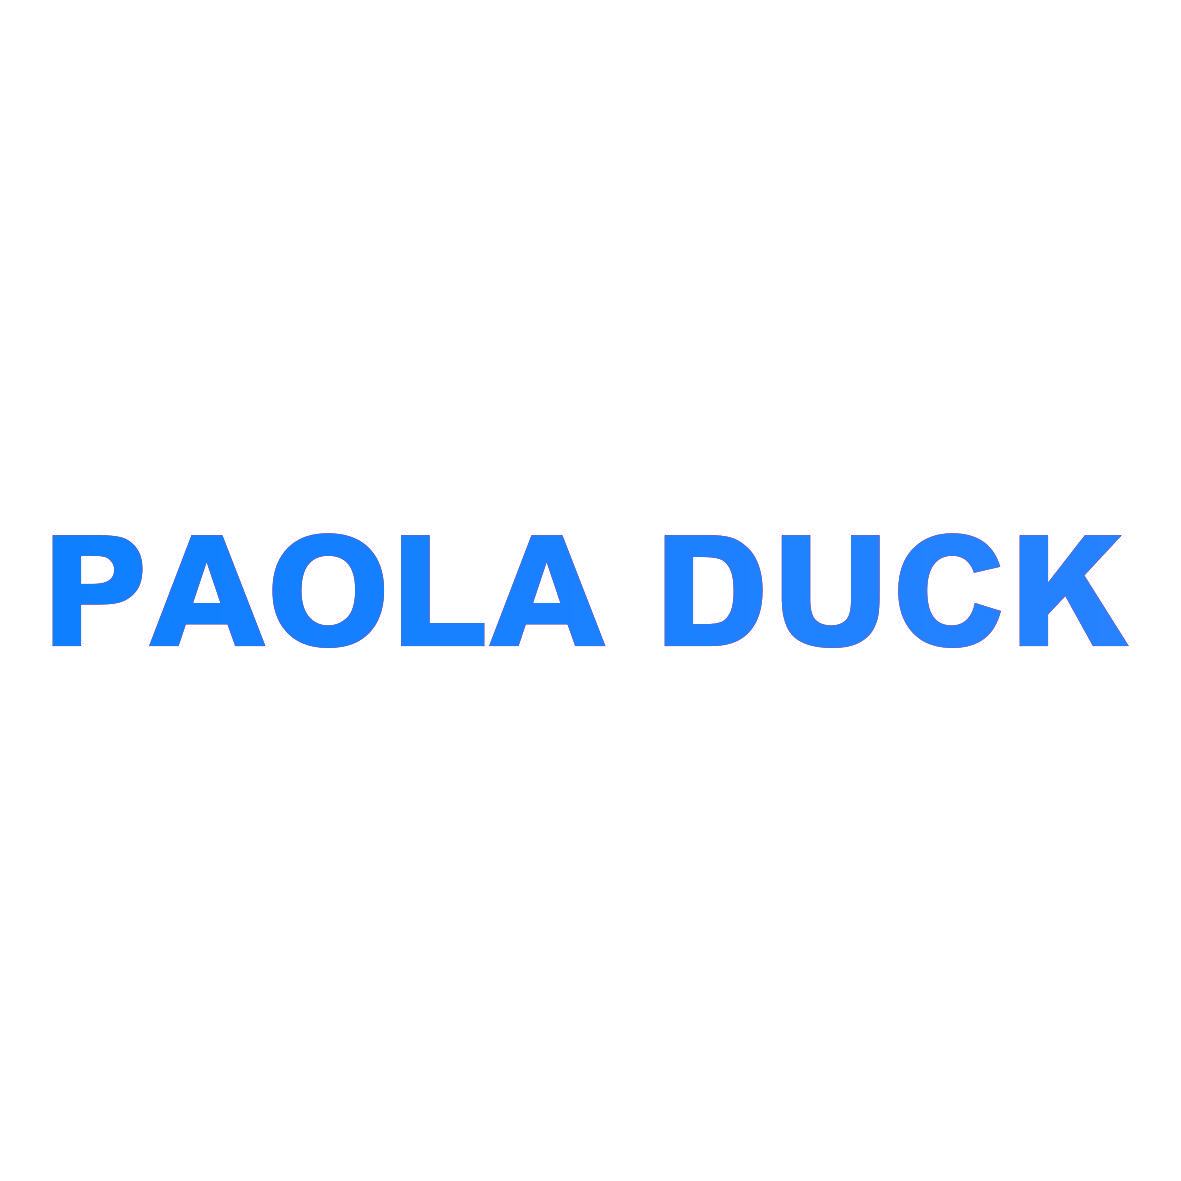 PAOLA DUCK